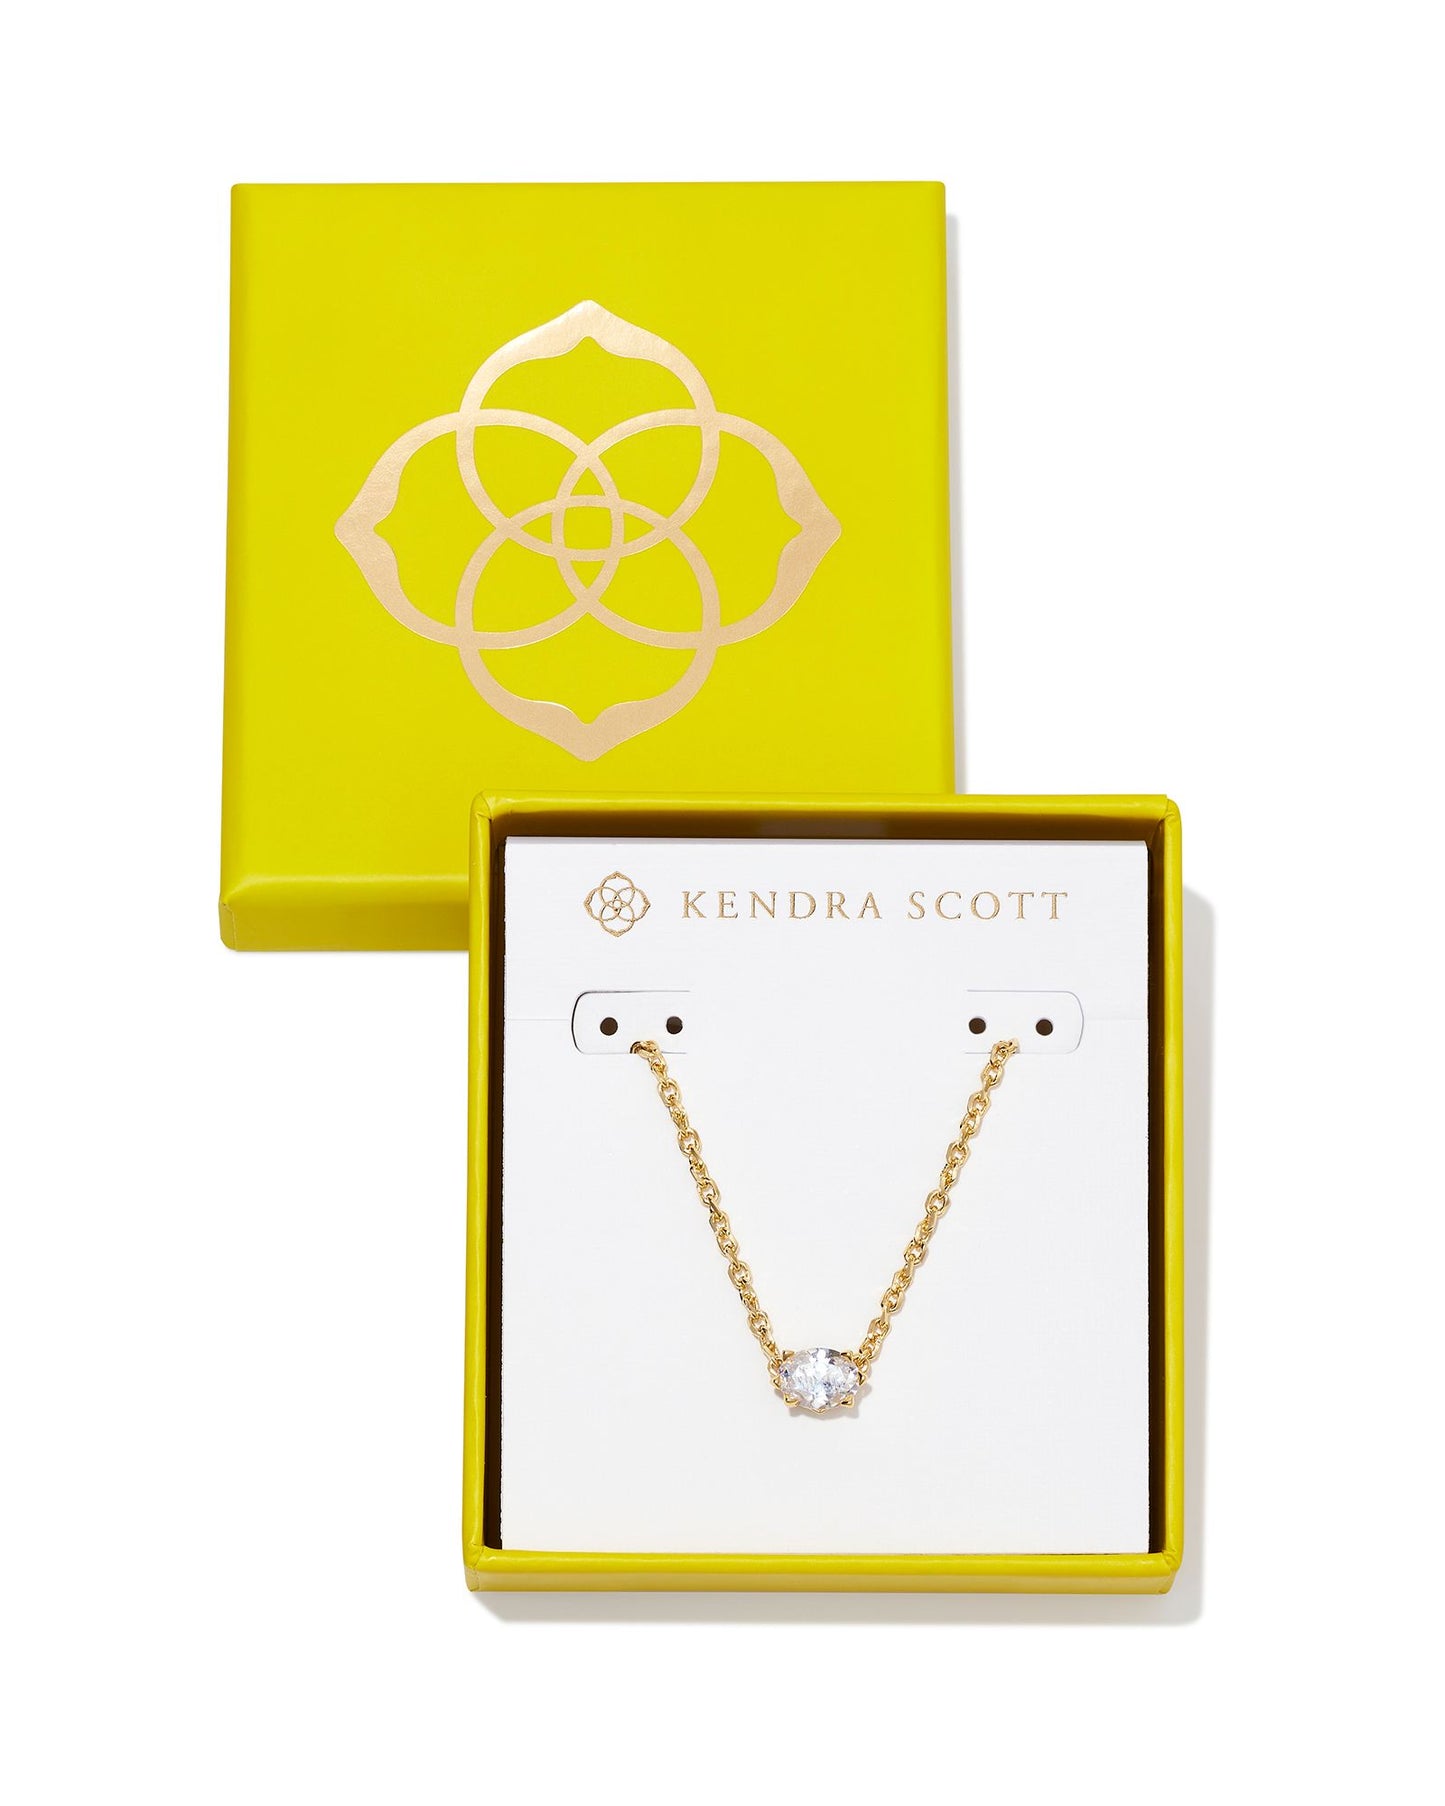 Kendra Scott Cailin Pendant Necklace Boxed Gold White CZ-Jewelry Set-Kendra Scott-G00015GLD-The Twisted Chandelier